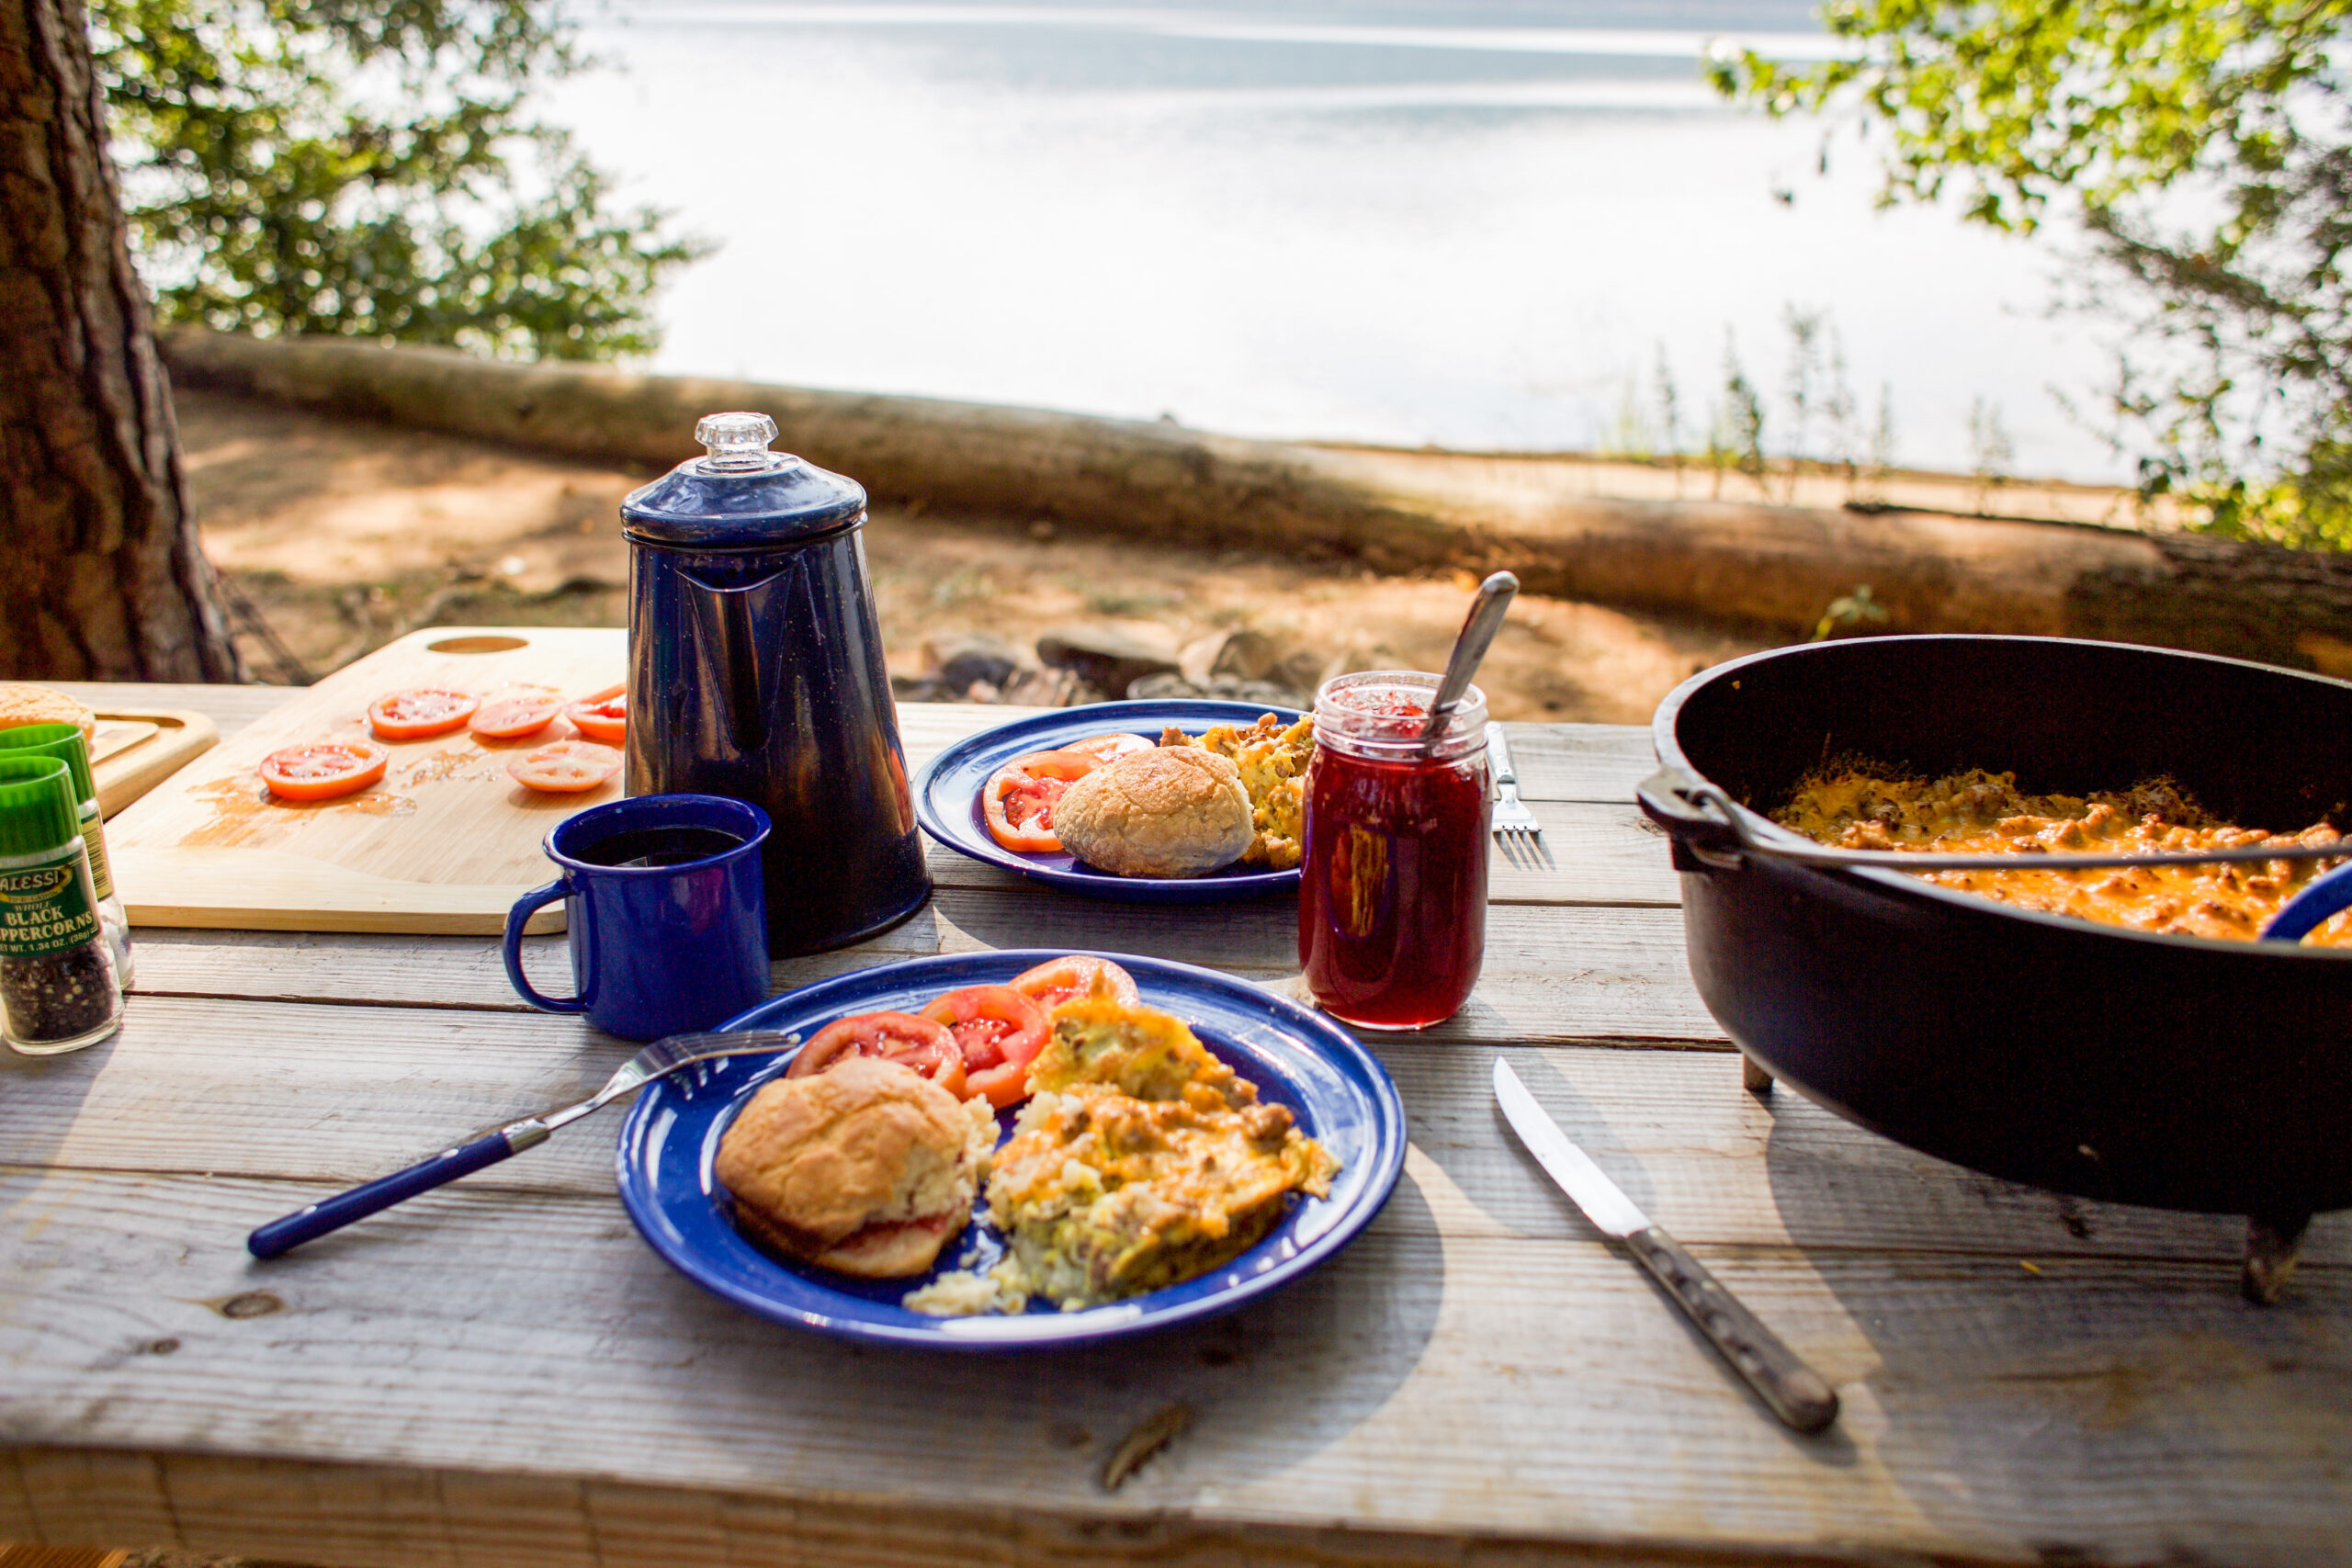 3 Lodge Cast Iron Skillets: A Camp Cooking Showdown - The RV Atlas